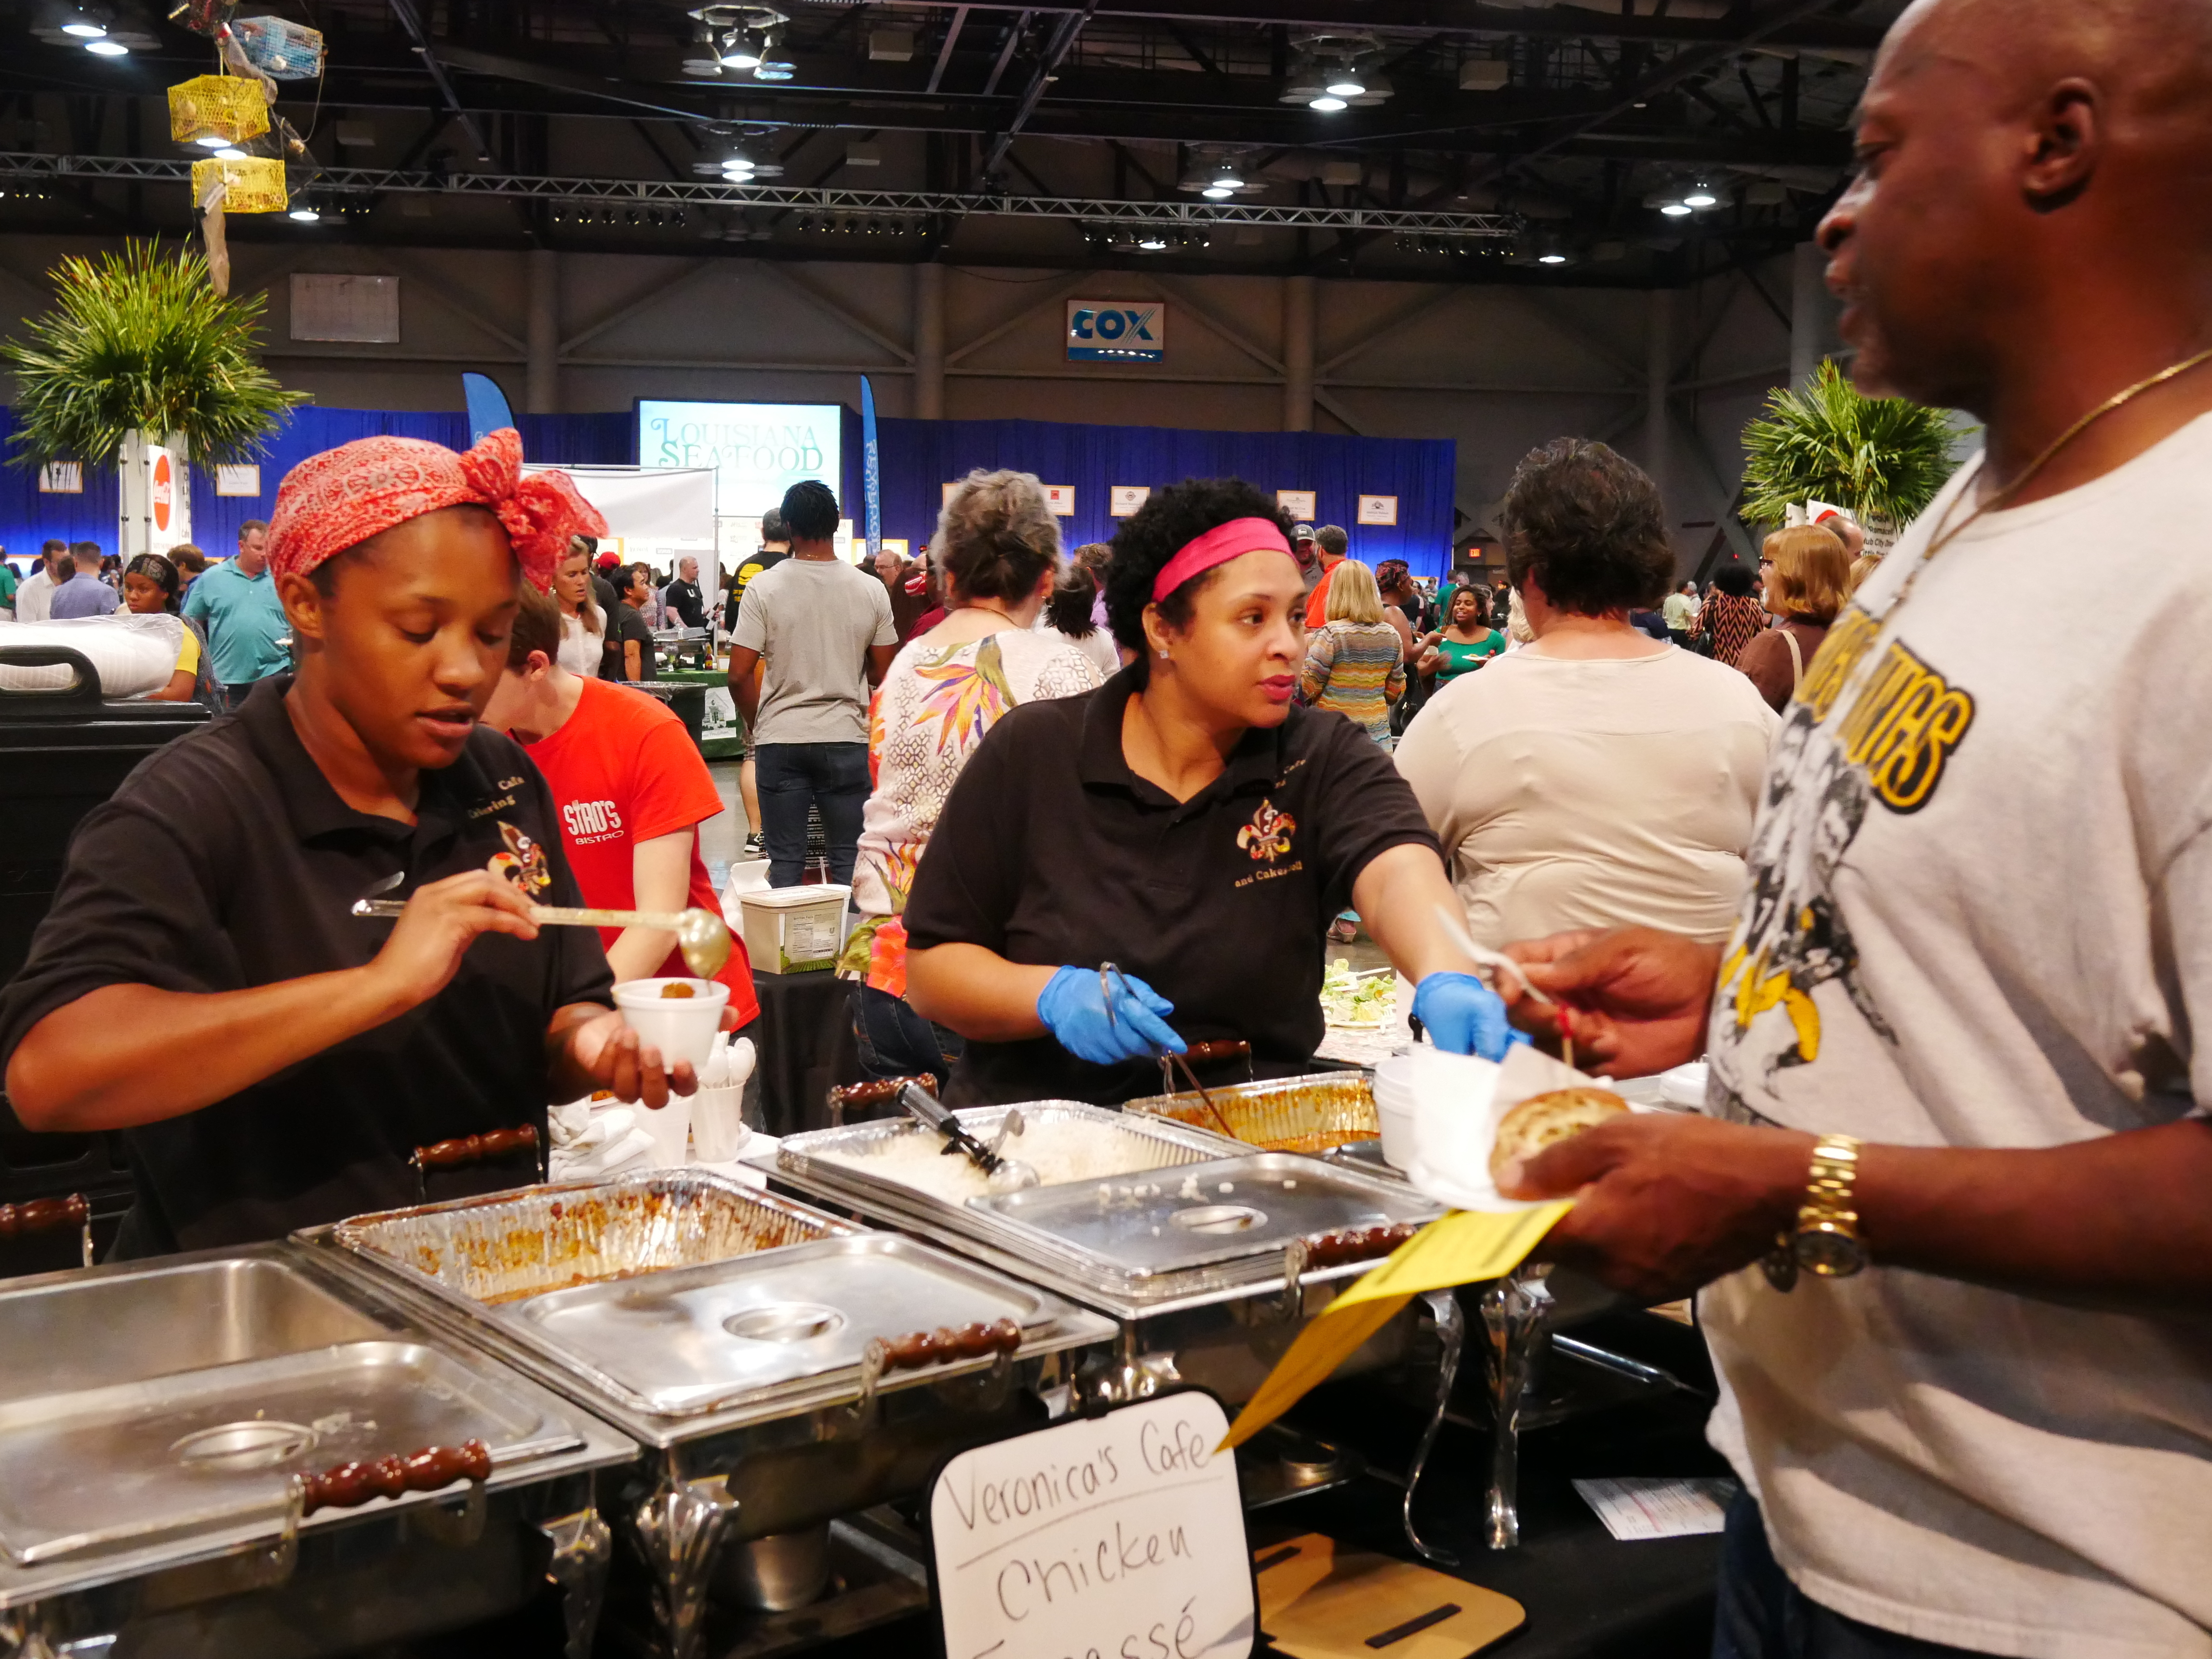 Restaurant workers dole out chicken fricassee at the "Taste of EatLafayette" festival in the sprawling Cajundome arena in Lafayette, Louisiana. Locals say Bourdain captured the subtleties of their culture and cuisine, even if at times some thought he overemphasized alcohol.